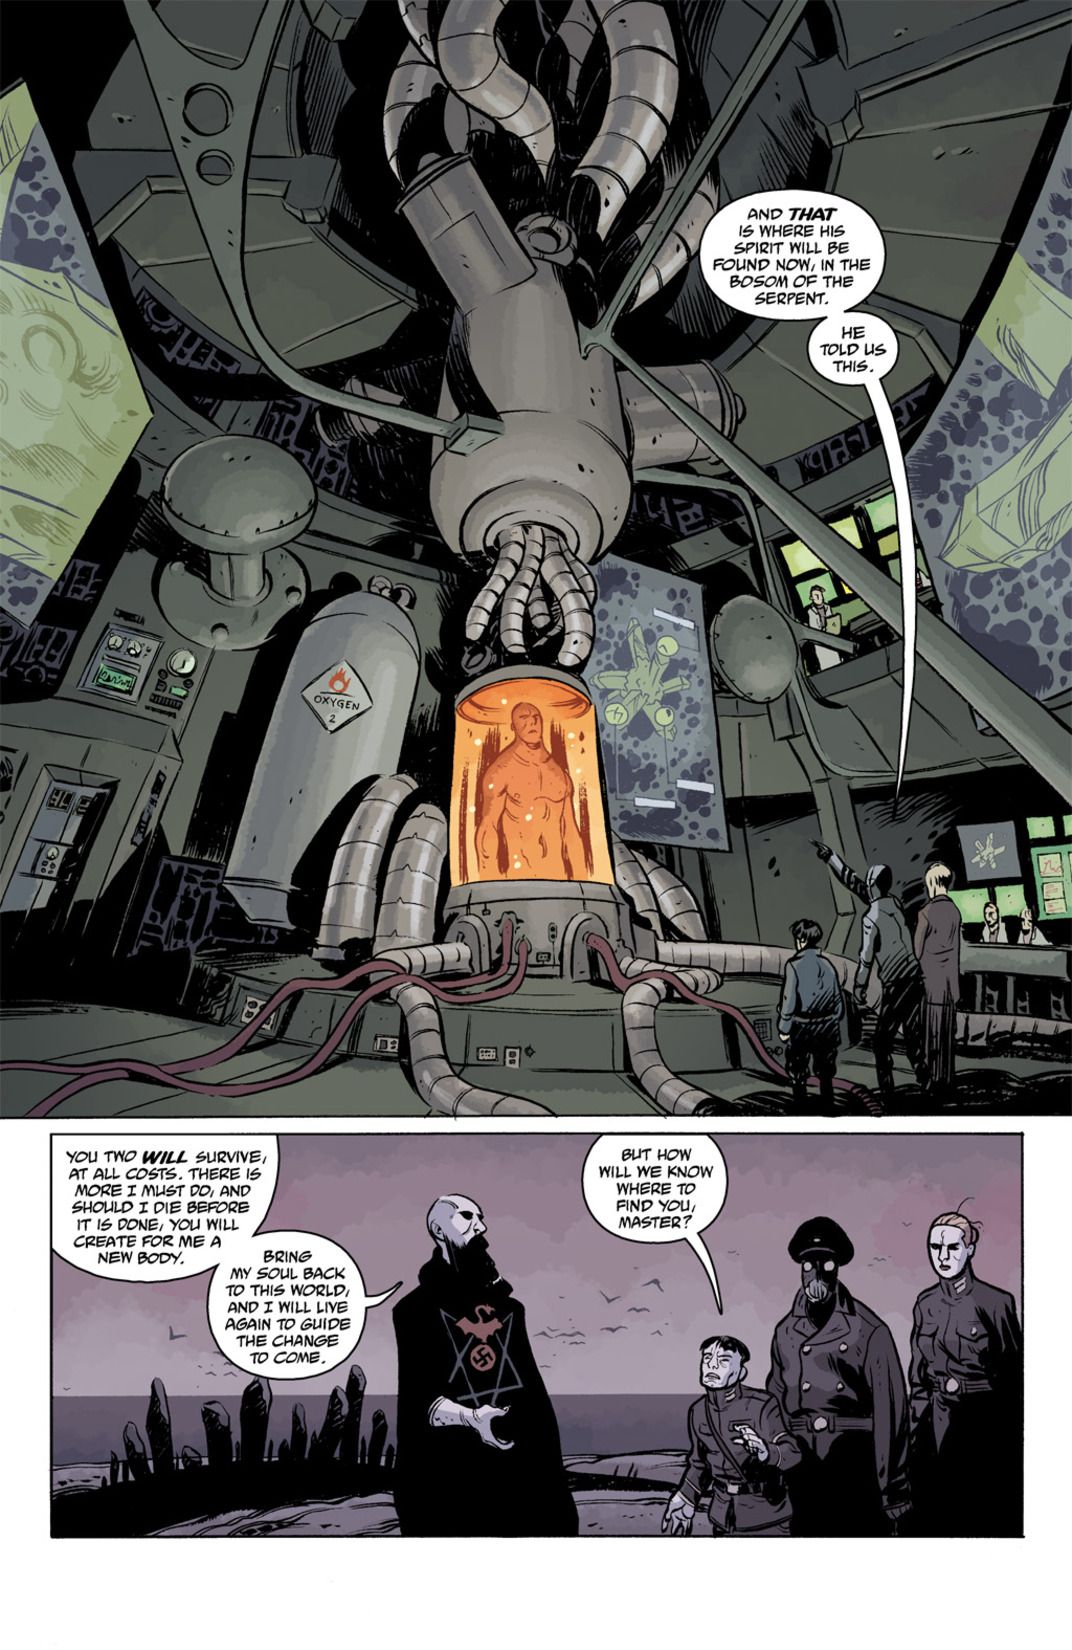 B.P.R.D. Hell On Earth: The Return Of The Master #4